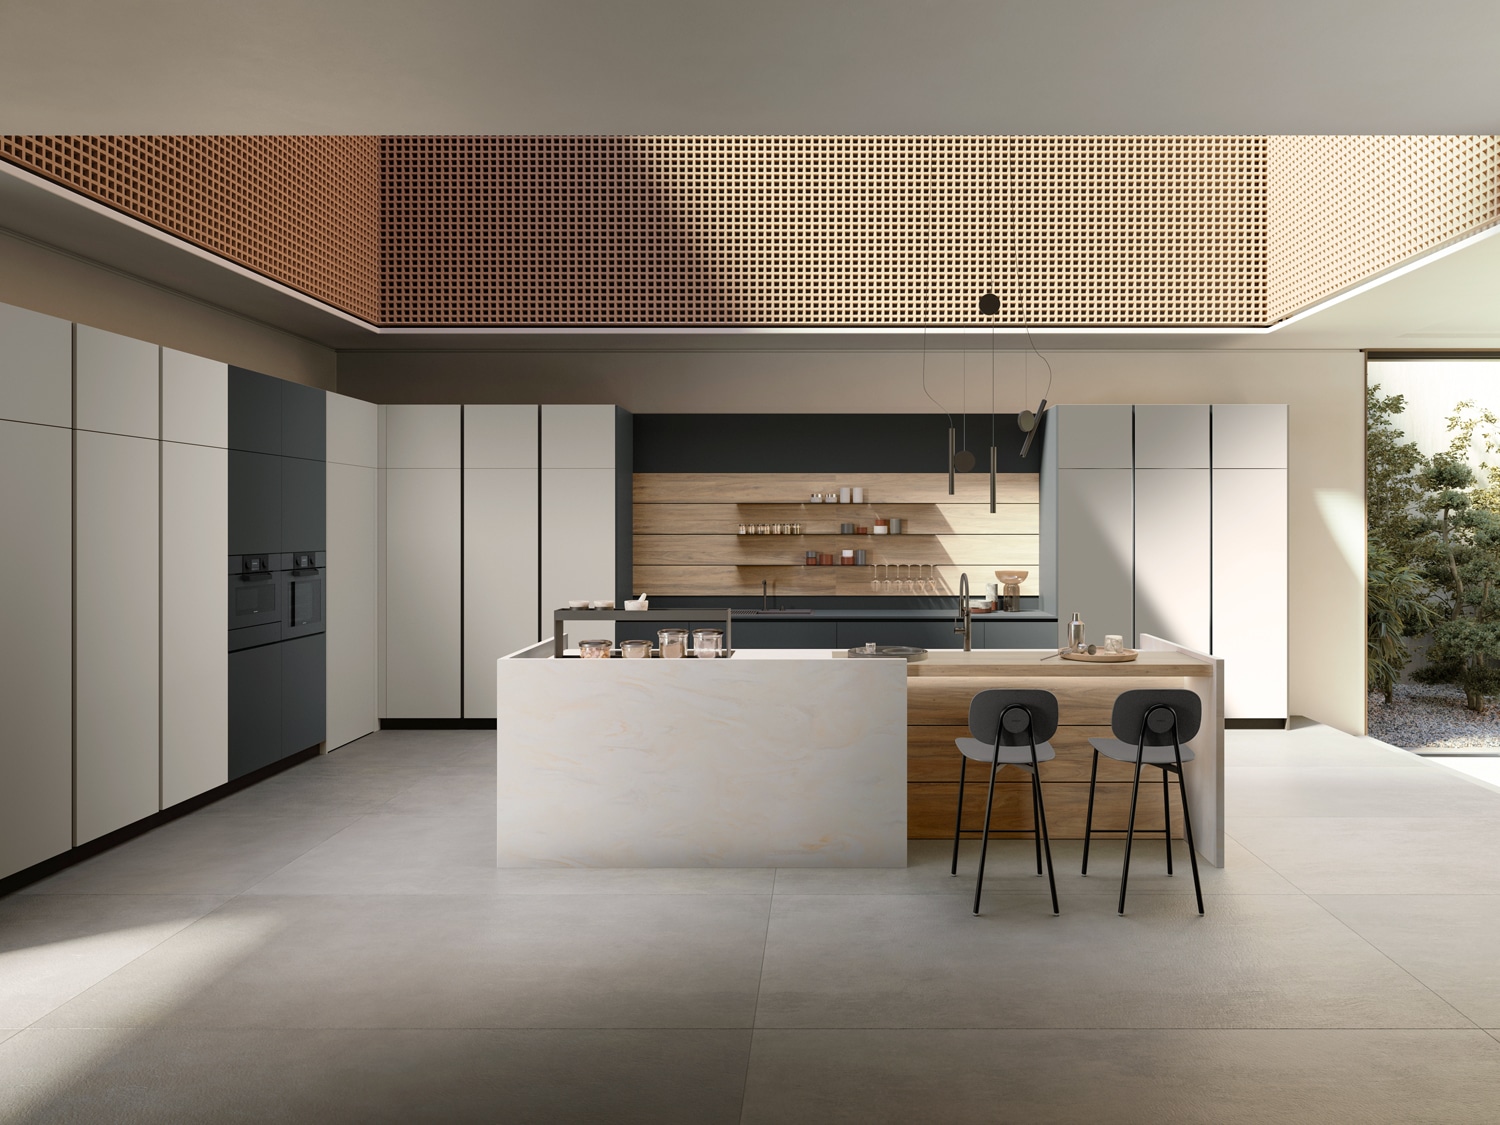 This beautiful modern kitchen offers high storage capacity and elegant aesthetics. The contemporary play of light and dark tone gets a fresh take with the addition of the wood elements, which become the focal point of the design.